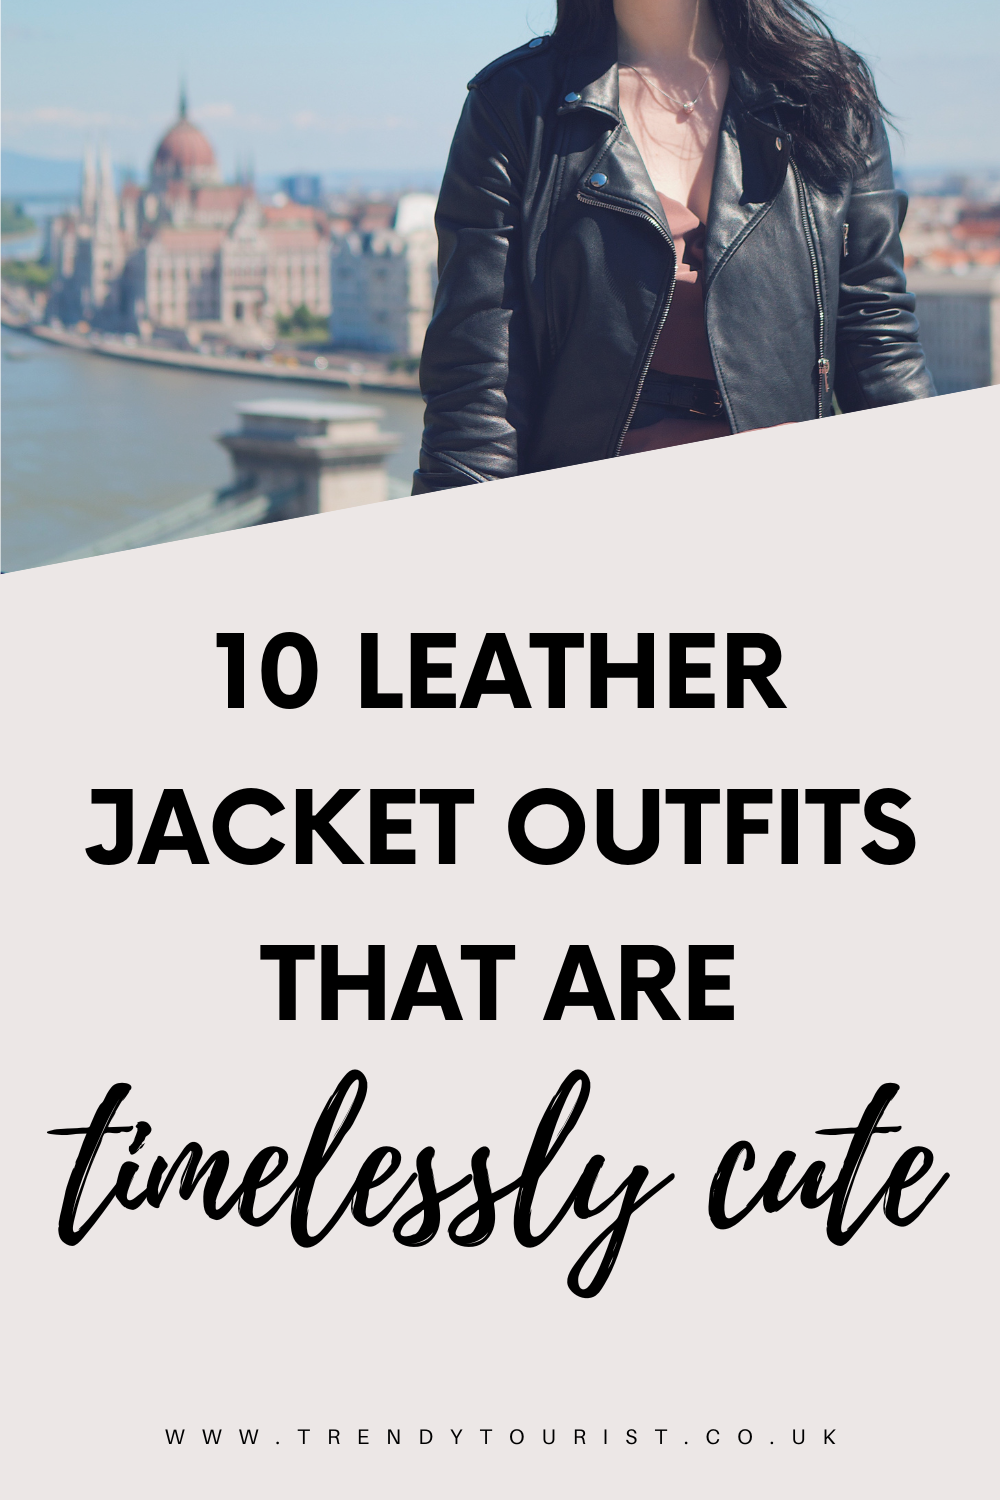 10 Leather Jacket Outfits That Are Timelessly Cute